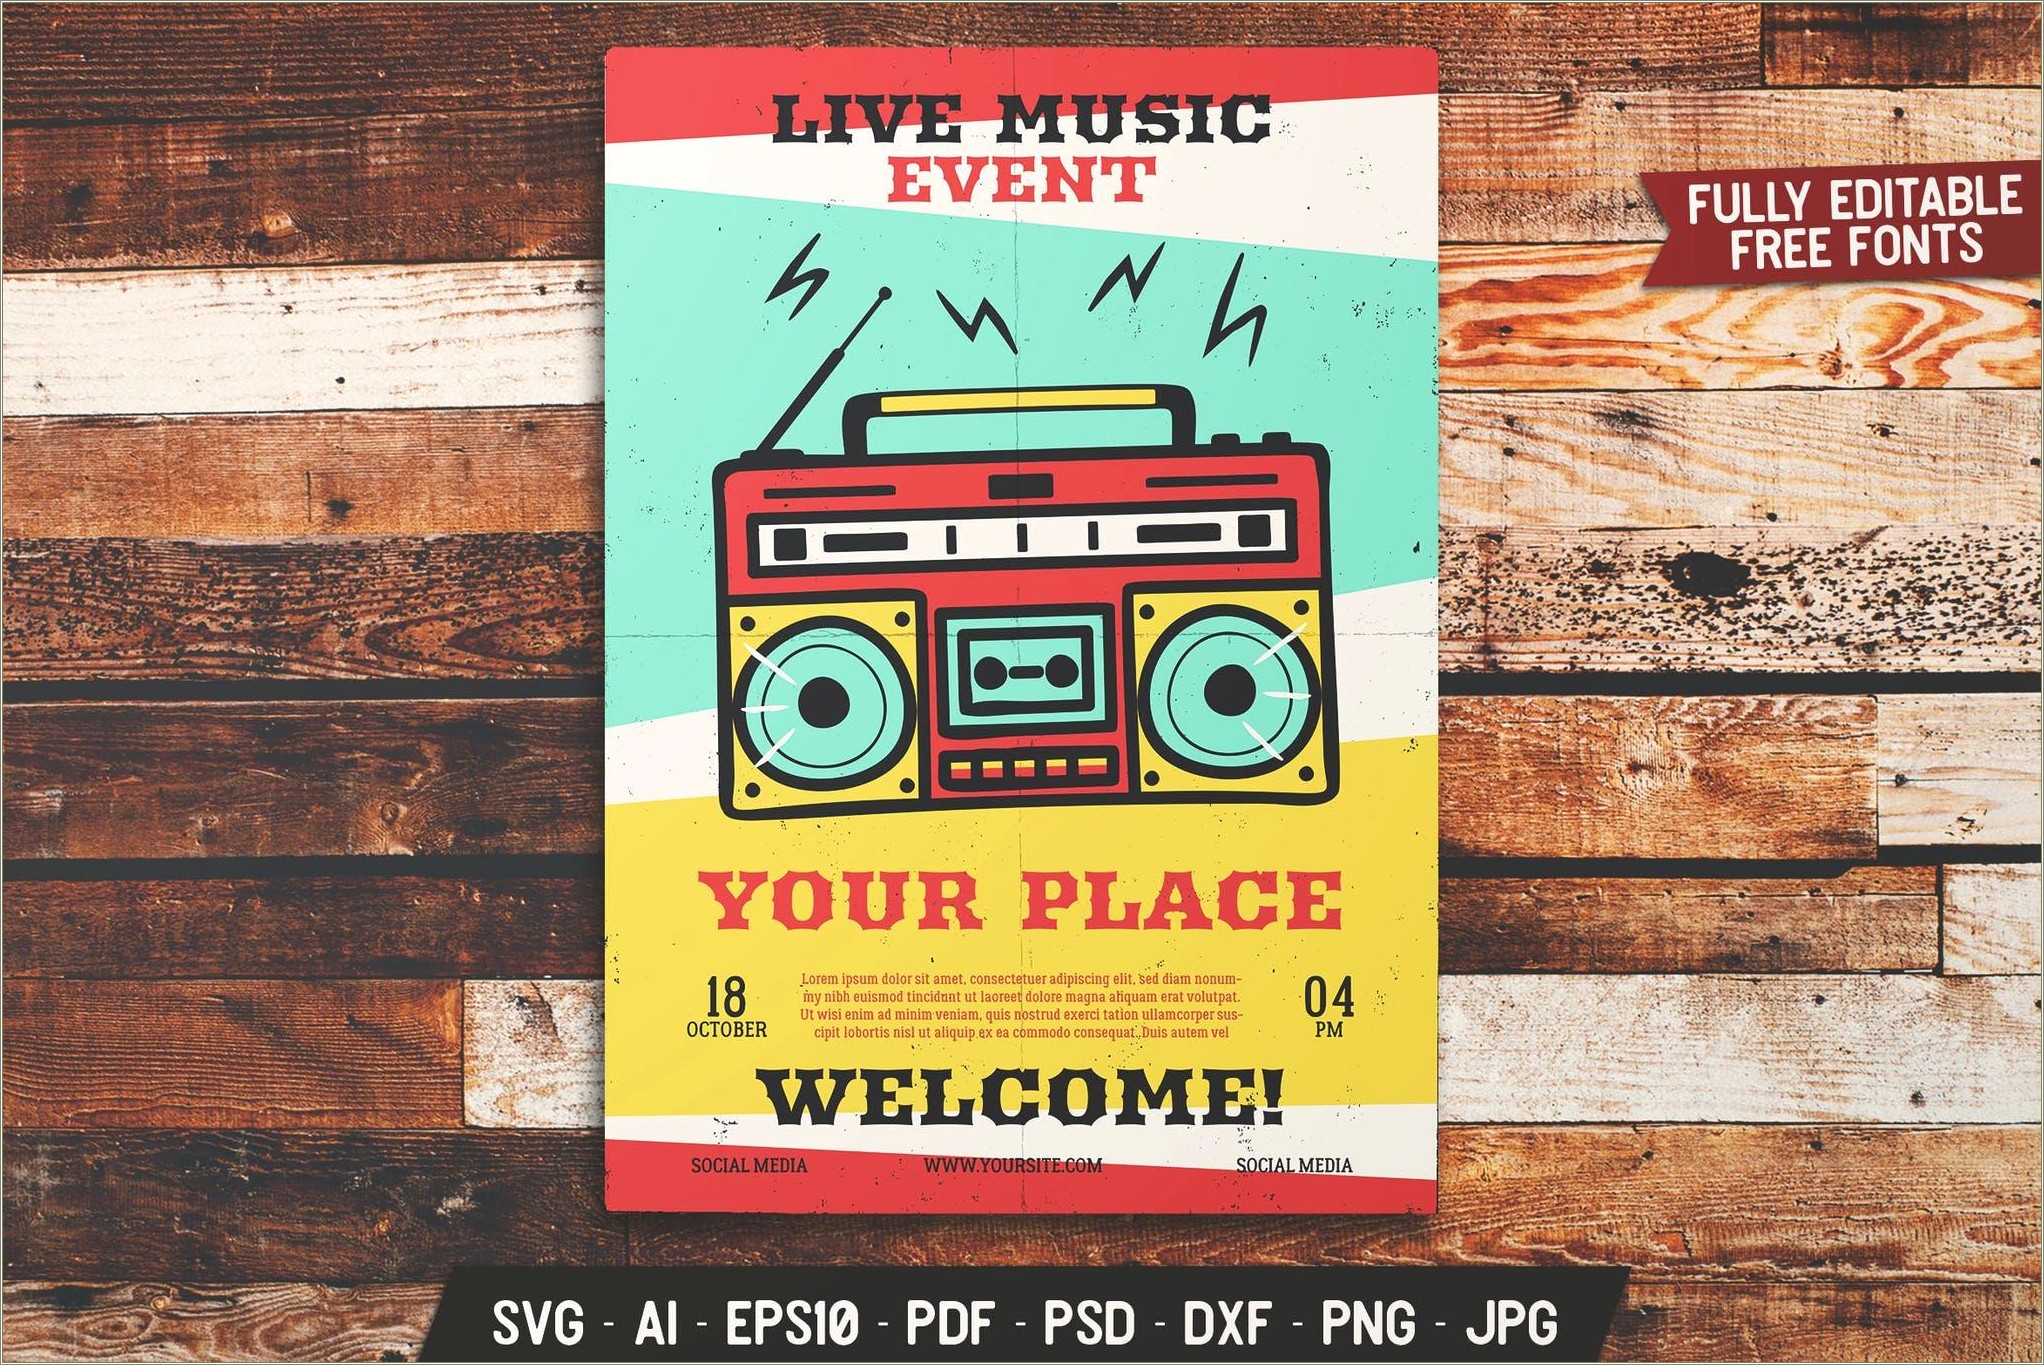 Concert Poster Free Template Adobe Indesign